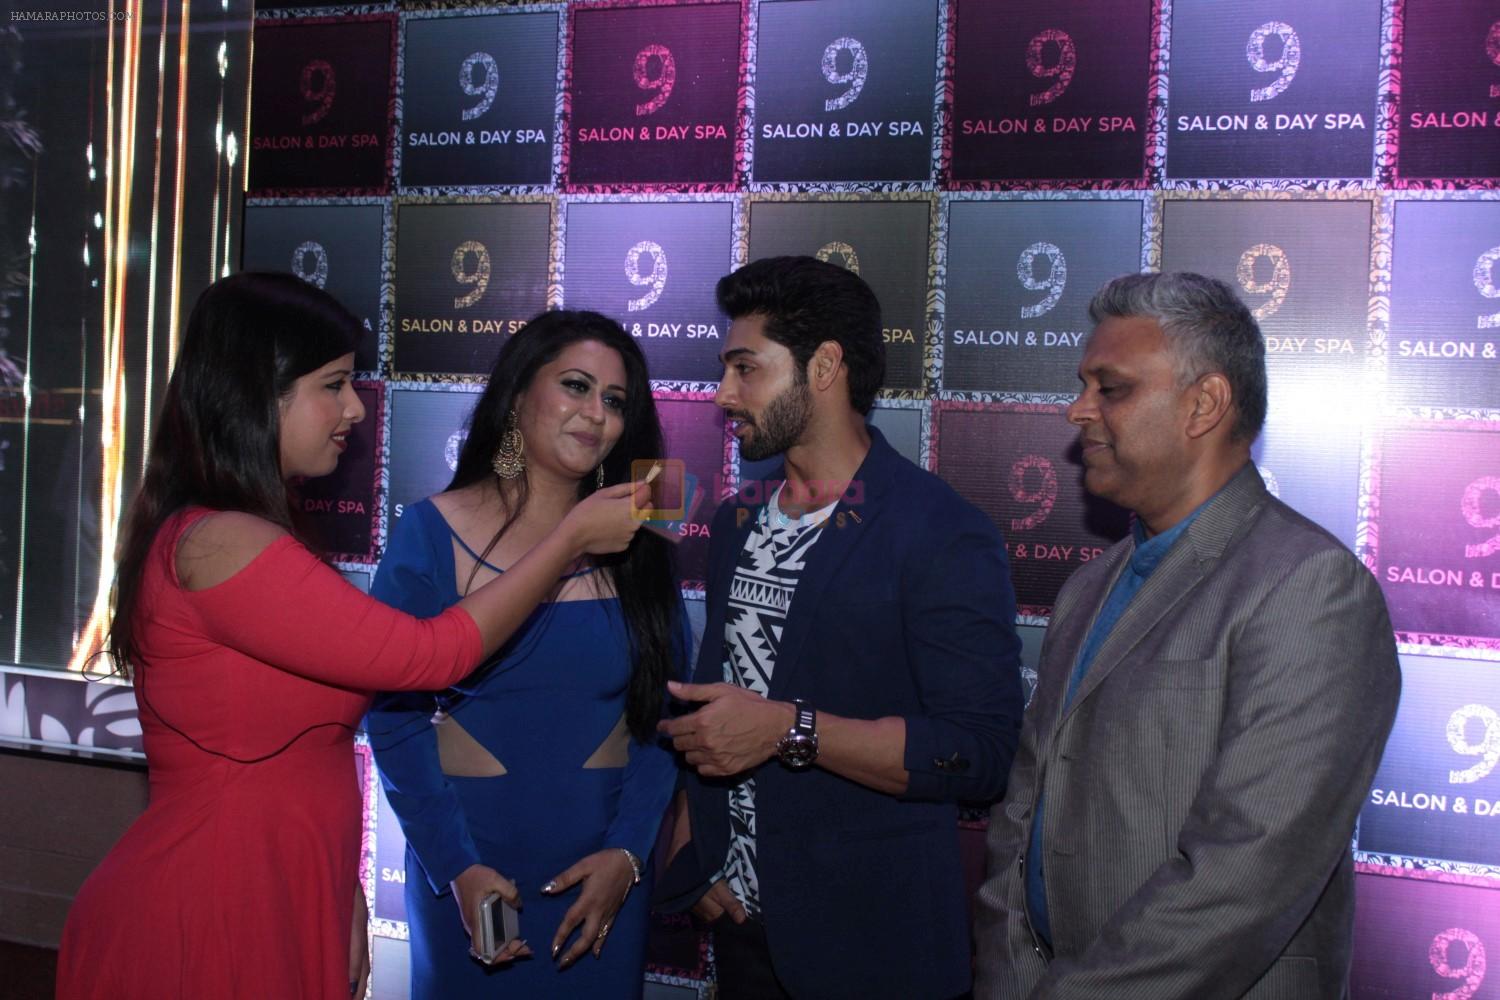 Ruslaan Mumtaz at the launch of 9 Salon & Day Spa on 22nd April 2017